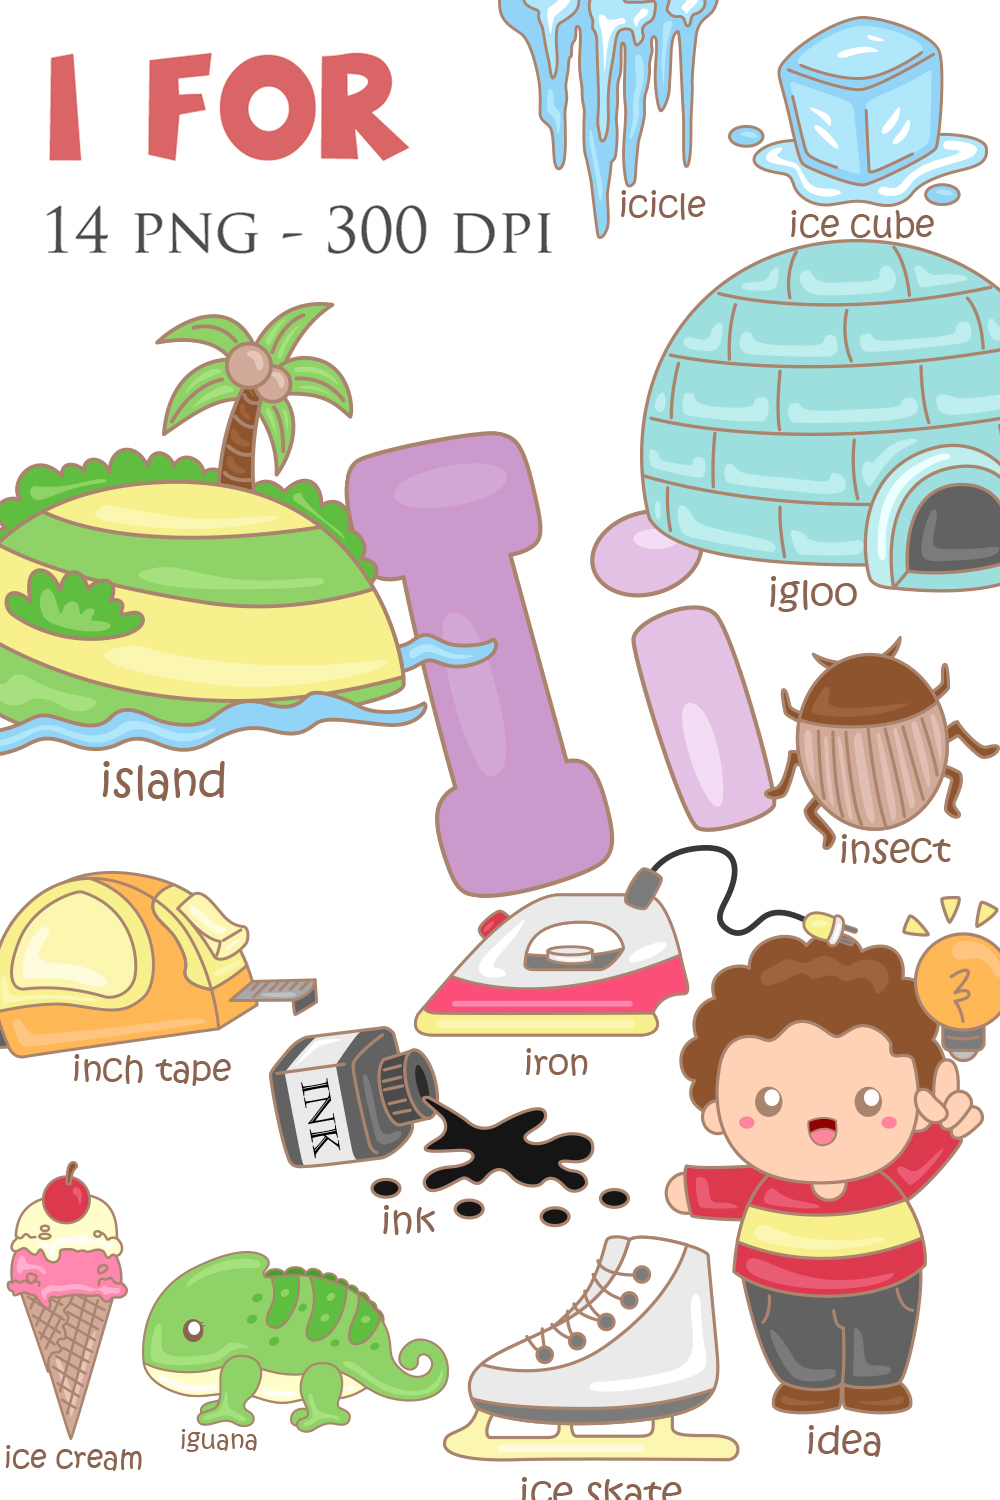 Alphabet I For Vocabulary School Letter Reading Writing Font Study Learning Student Toodler Kids Cartoon Island Inch Tape Ice Cube Ink Ice Skate Idea Iron Ice Cream Insect Igloo Ice Cream Iguana Icicle Illustration Vector Clipart pinterest preview image.